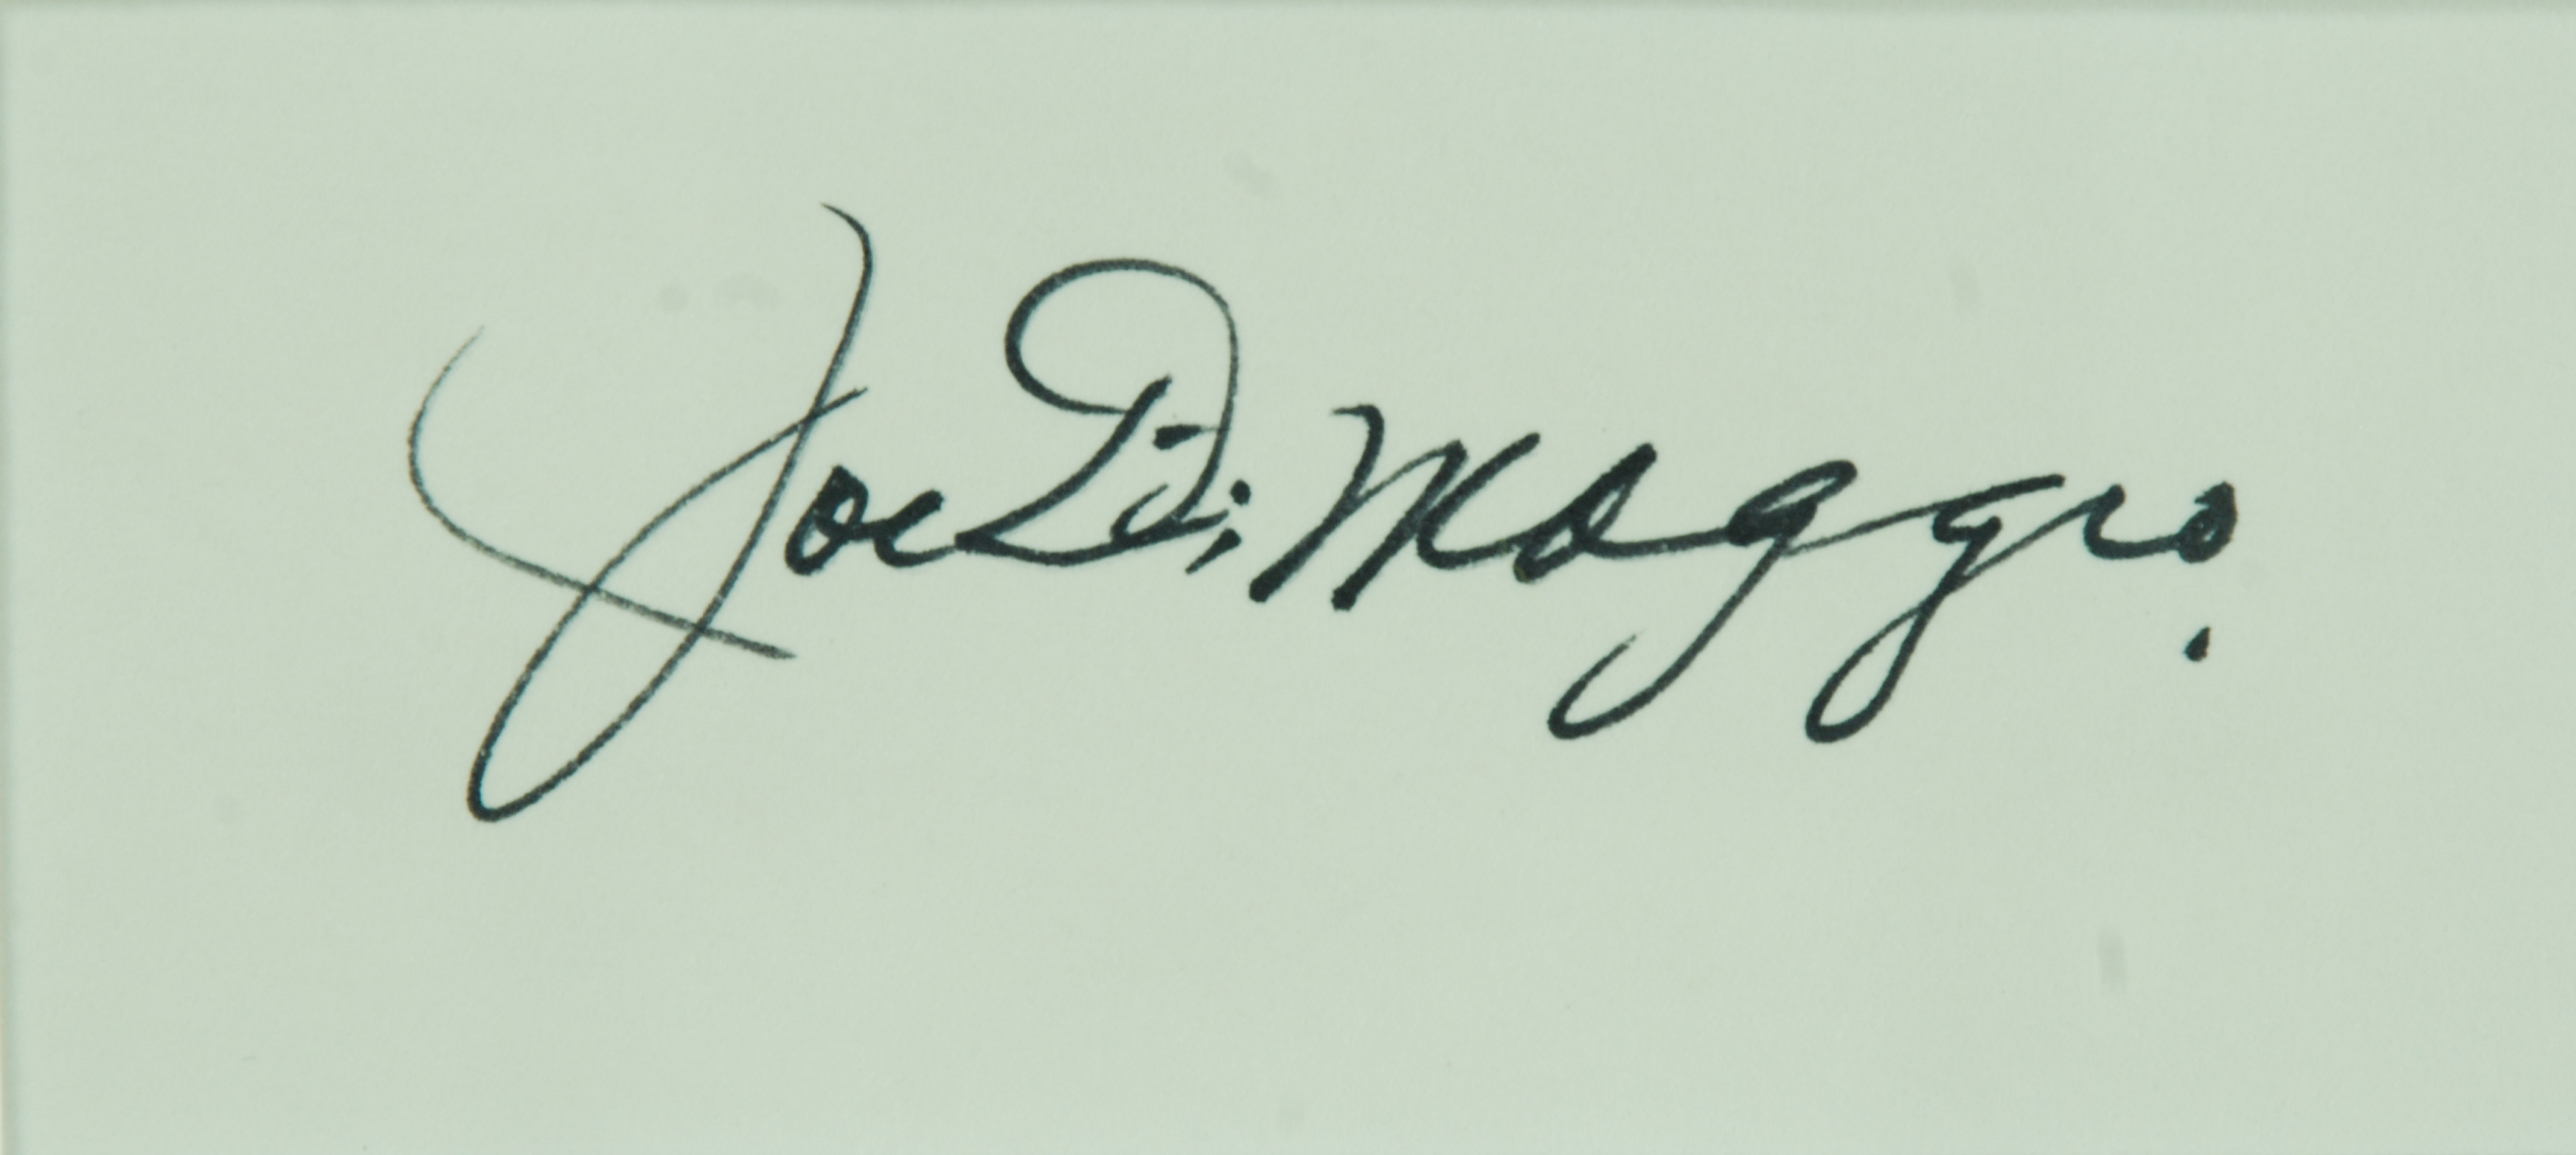 Joe DiMaggio Marilyn Monroe signed photo sells for $300,000 at